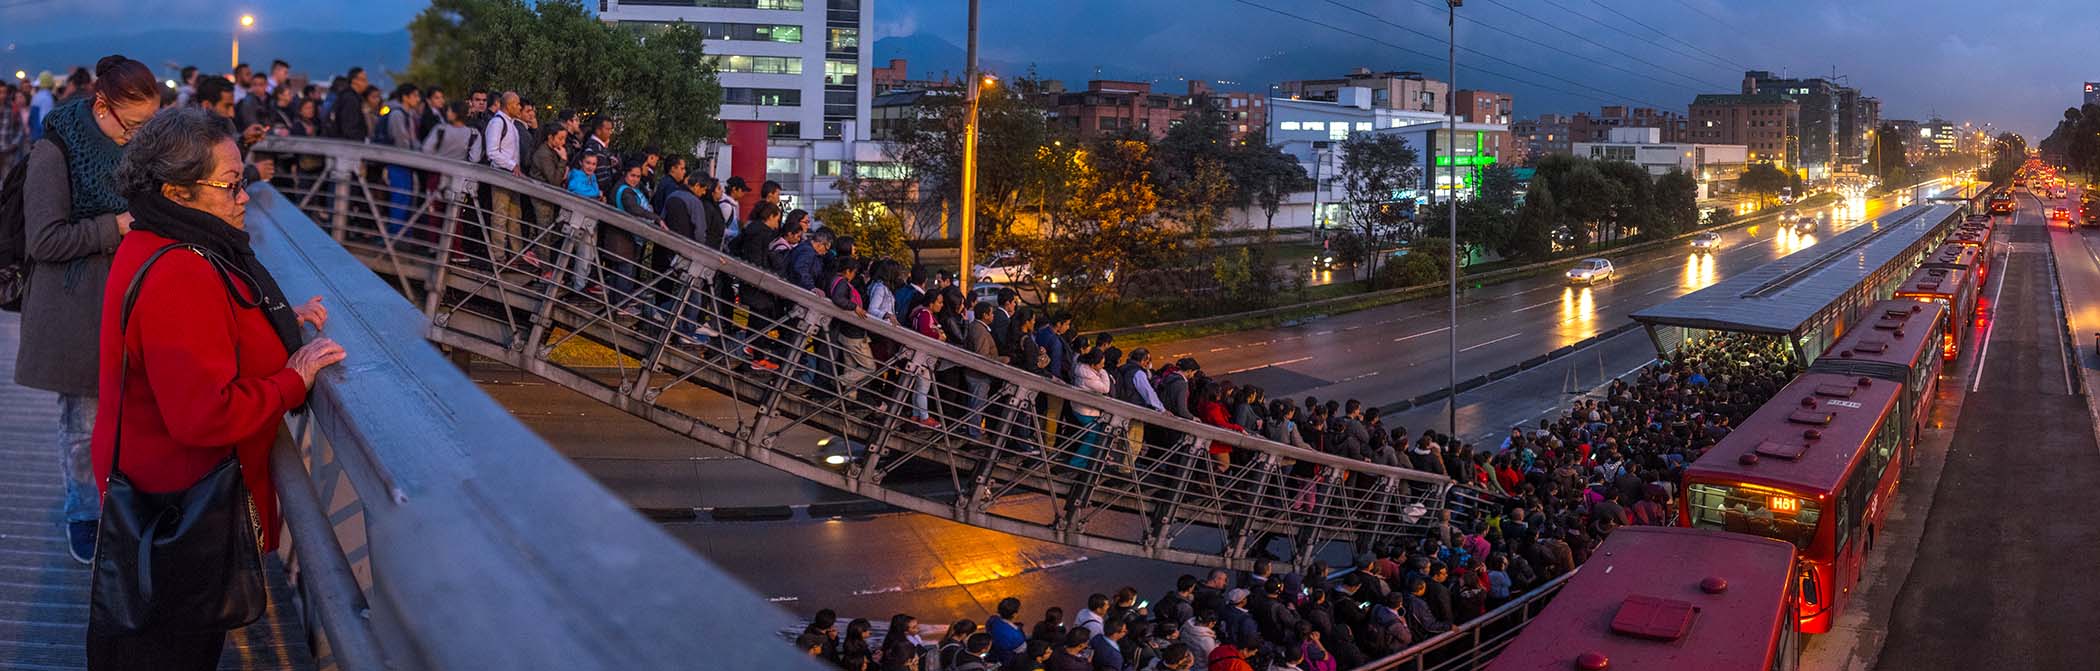 According to Transit App Moovit, one in every 5 passengers on Bogota’s public transit system transfers twice on a single journey. This picture in 2017 captures passengers as they wait to board one of Bogota’s TransMilenio’s BRT service. (Image: Flickr)